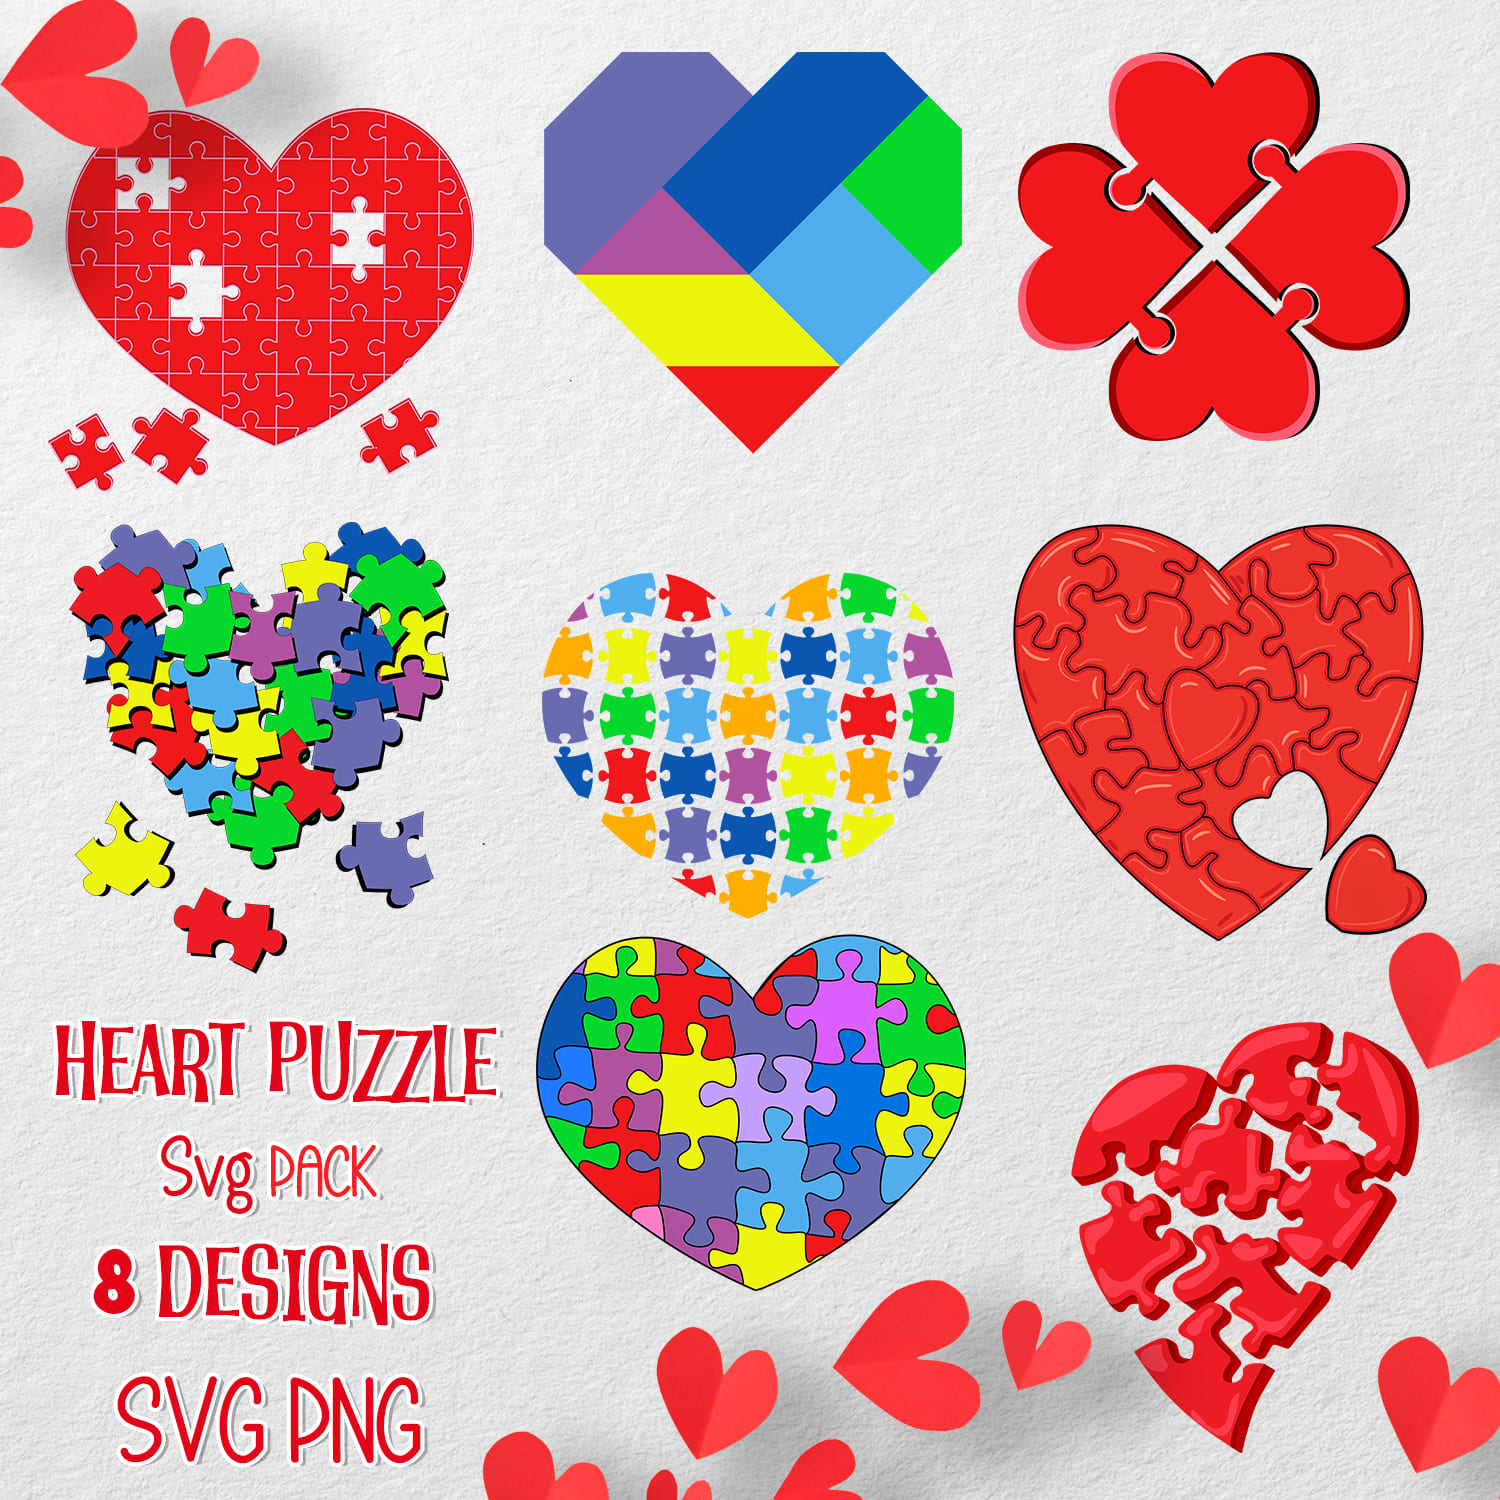 Heart puzzle svg - main image preview.